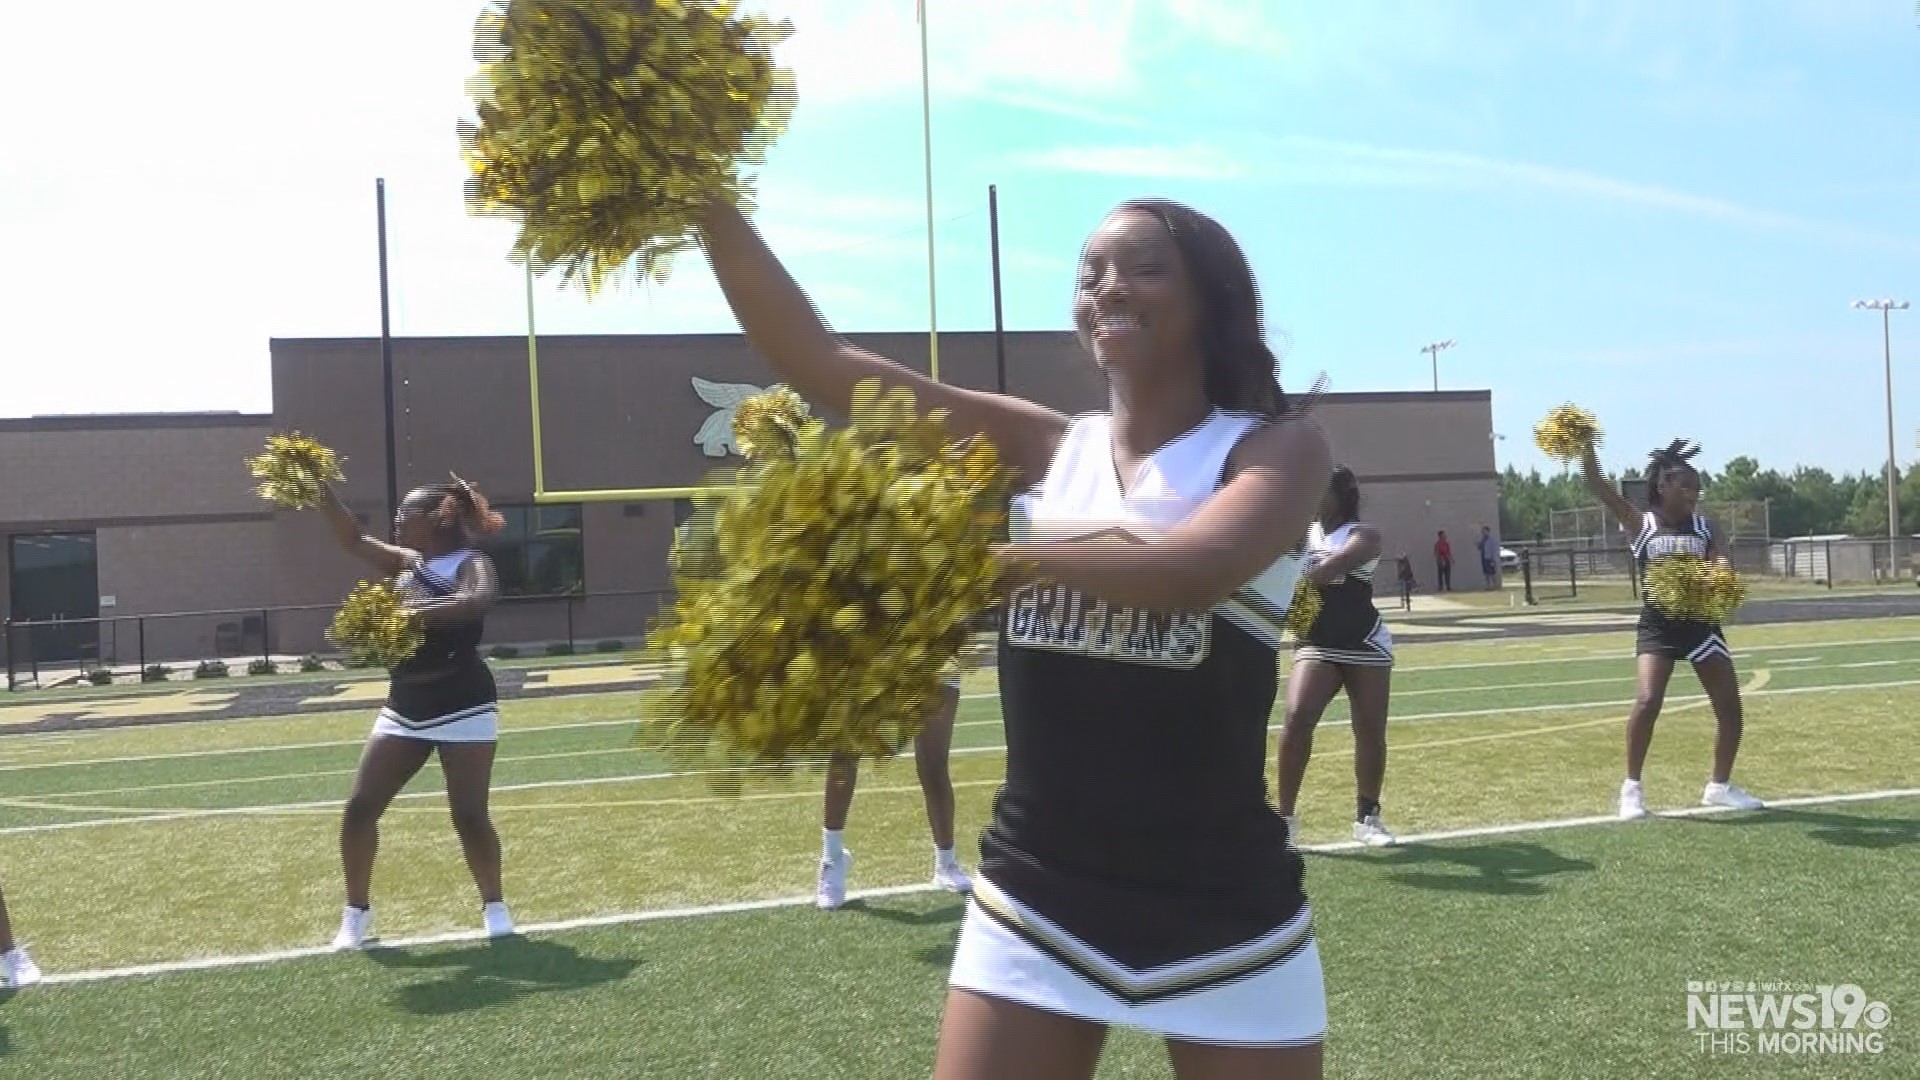 Fairfield Central High School cheers in the new school year for Fairfield County Schools.